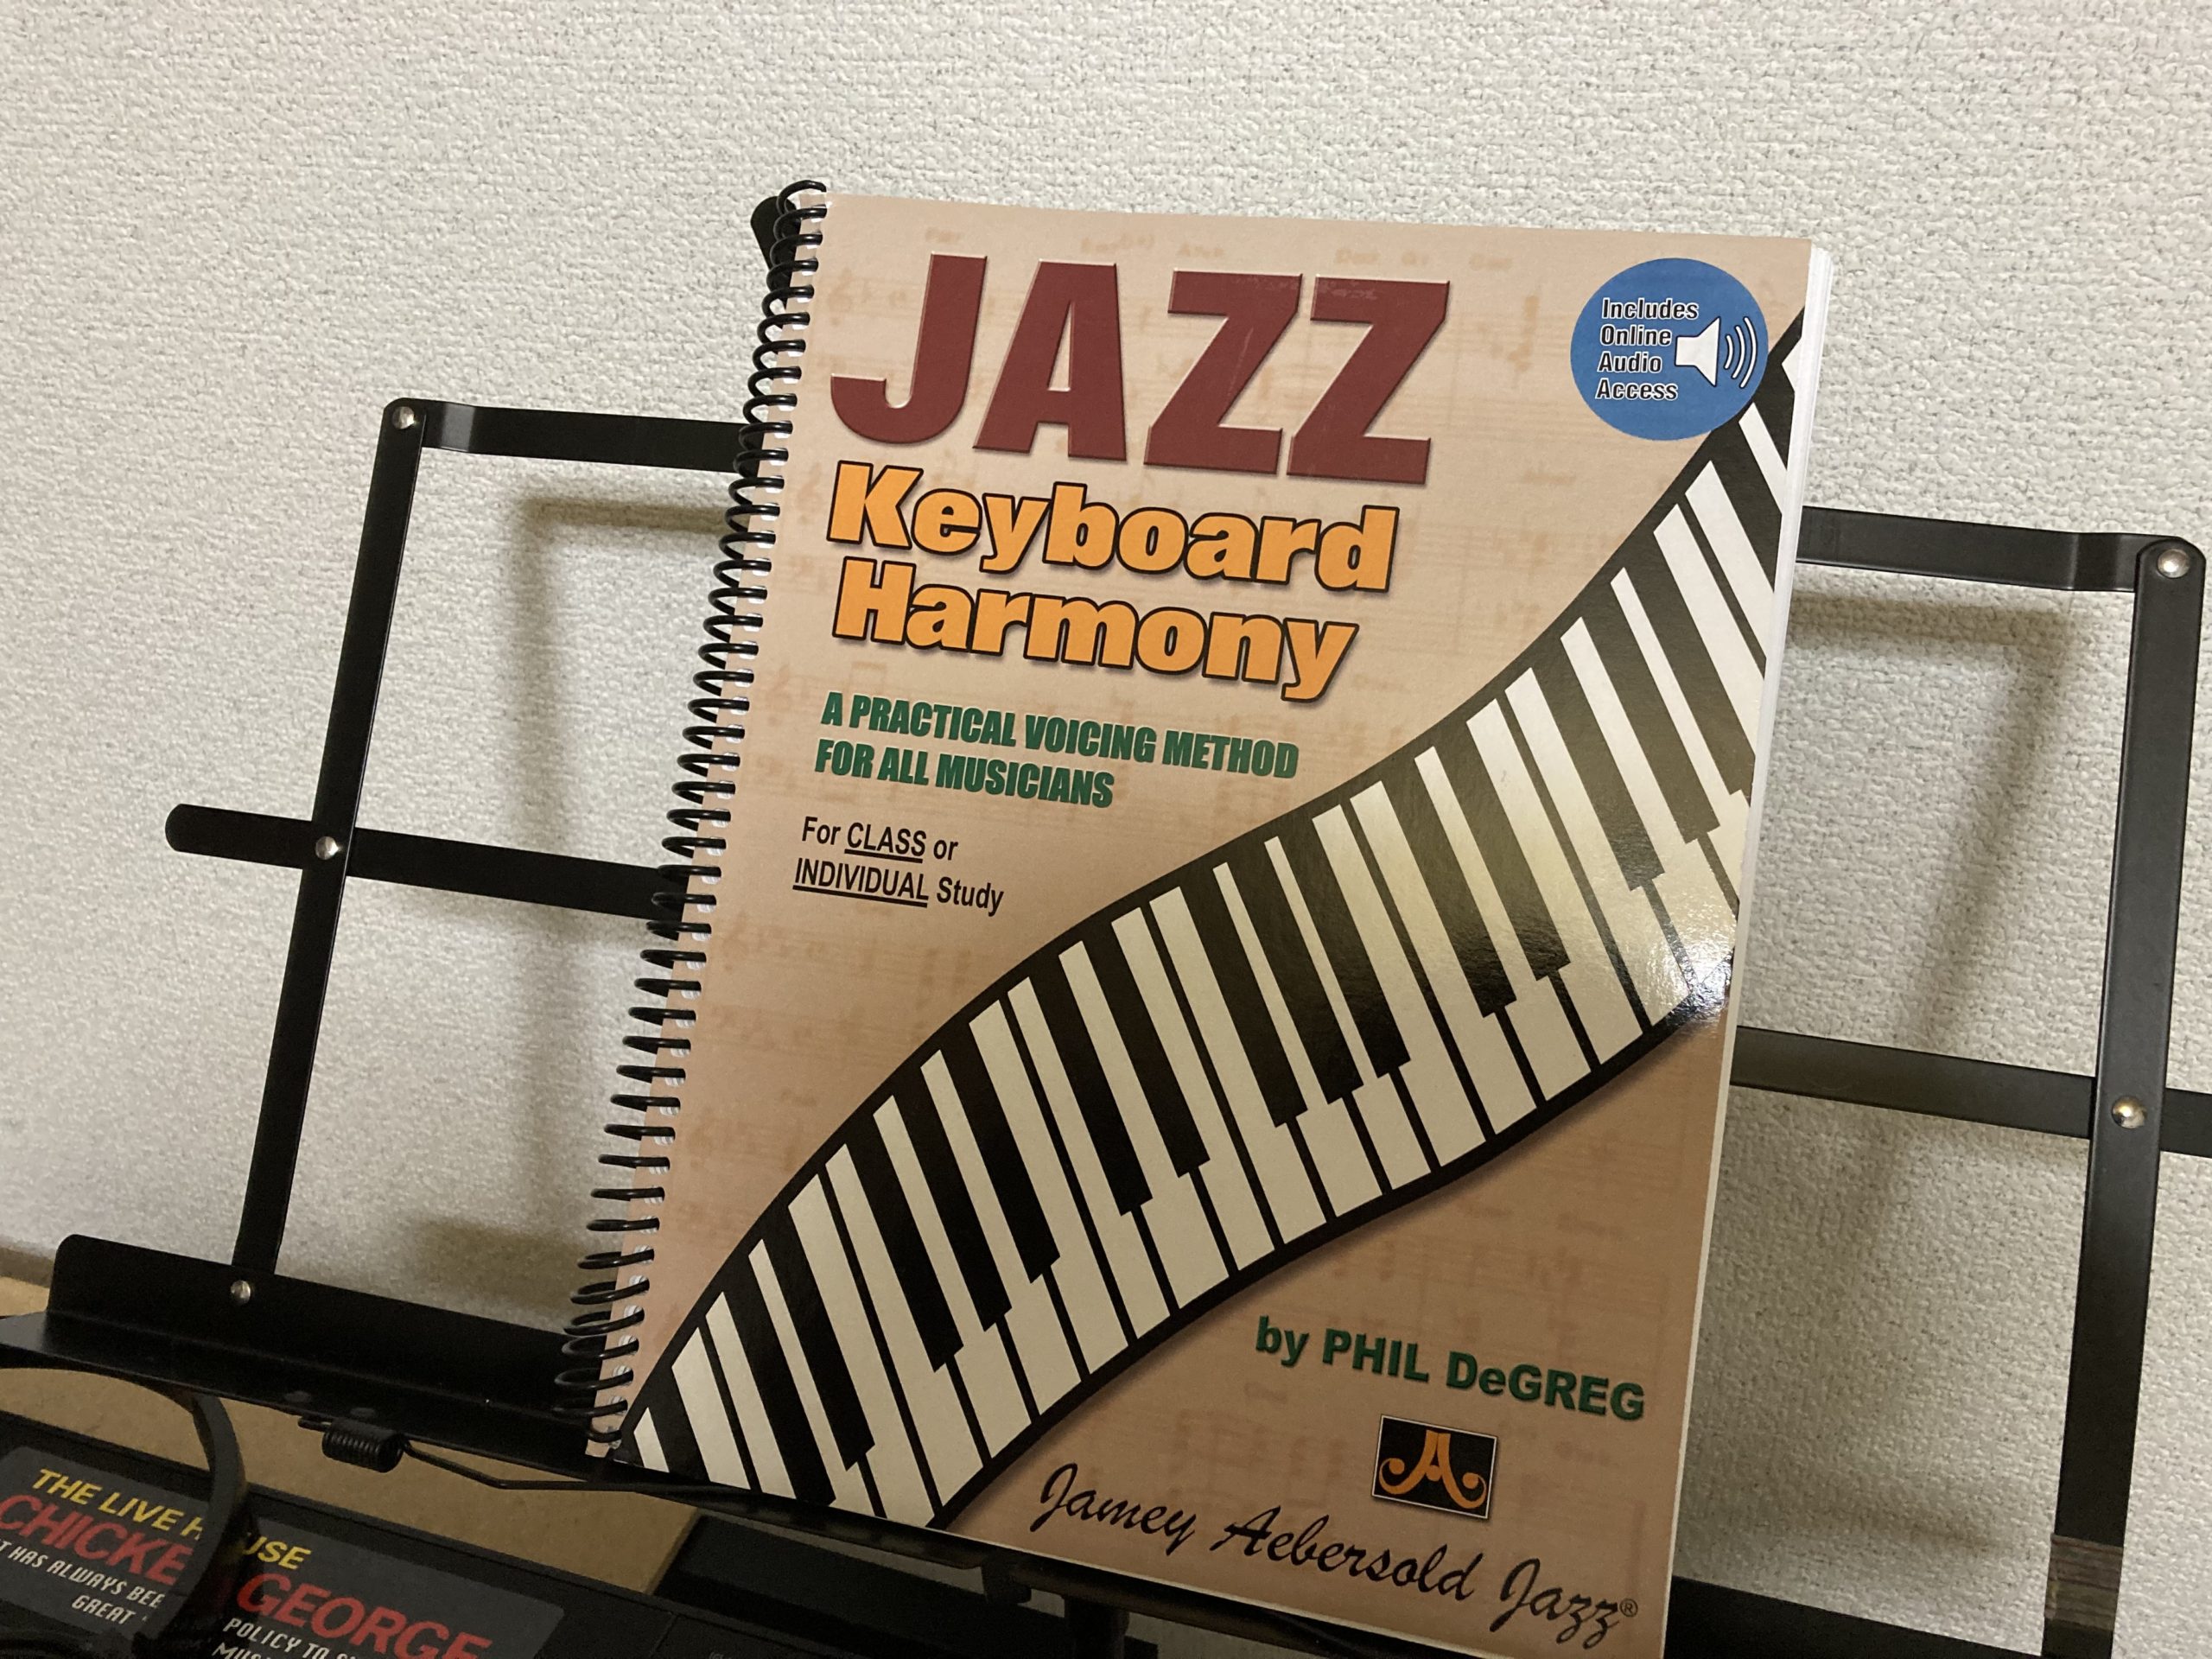 Jazz Keyboard Harmony: A Practical Voicing Method For All Musicians